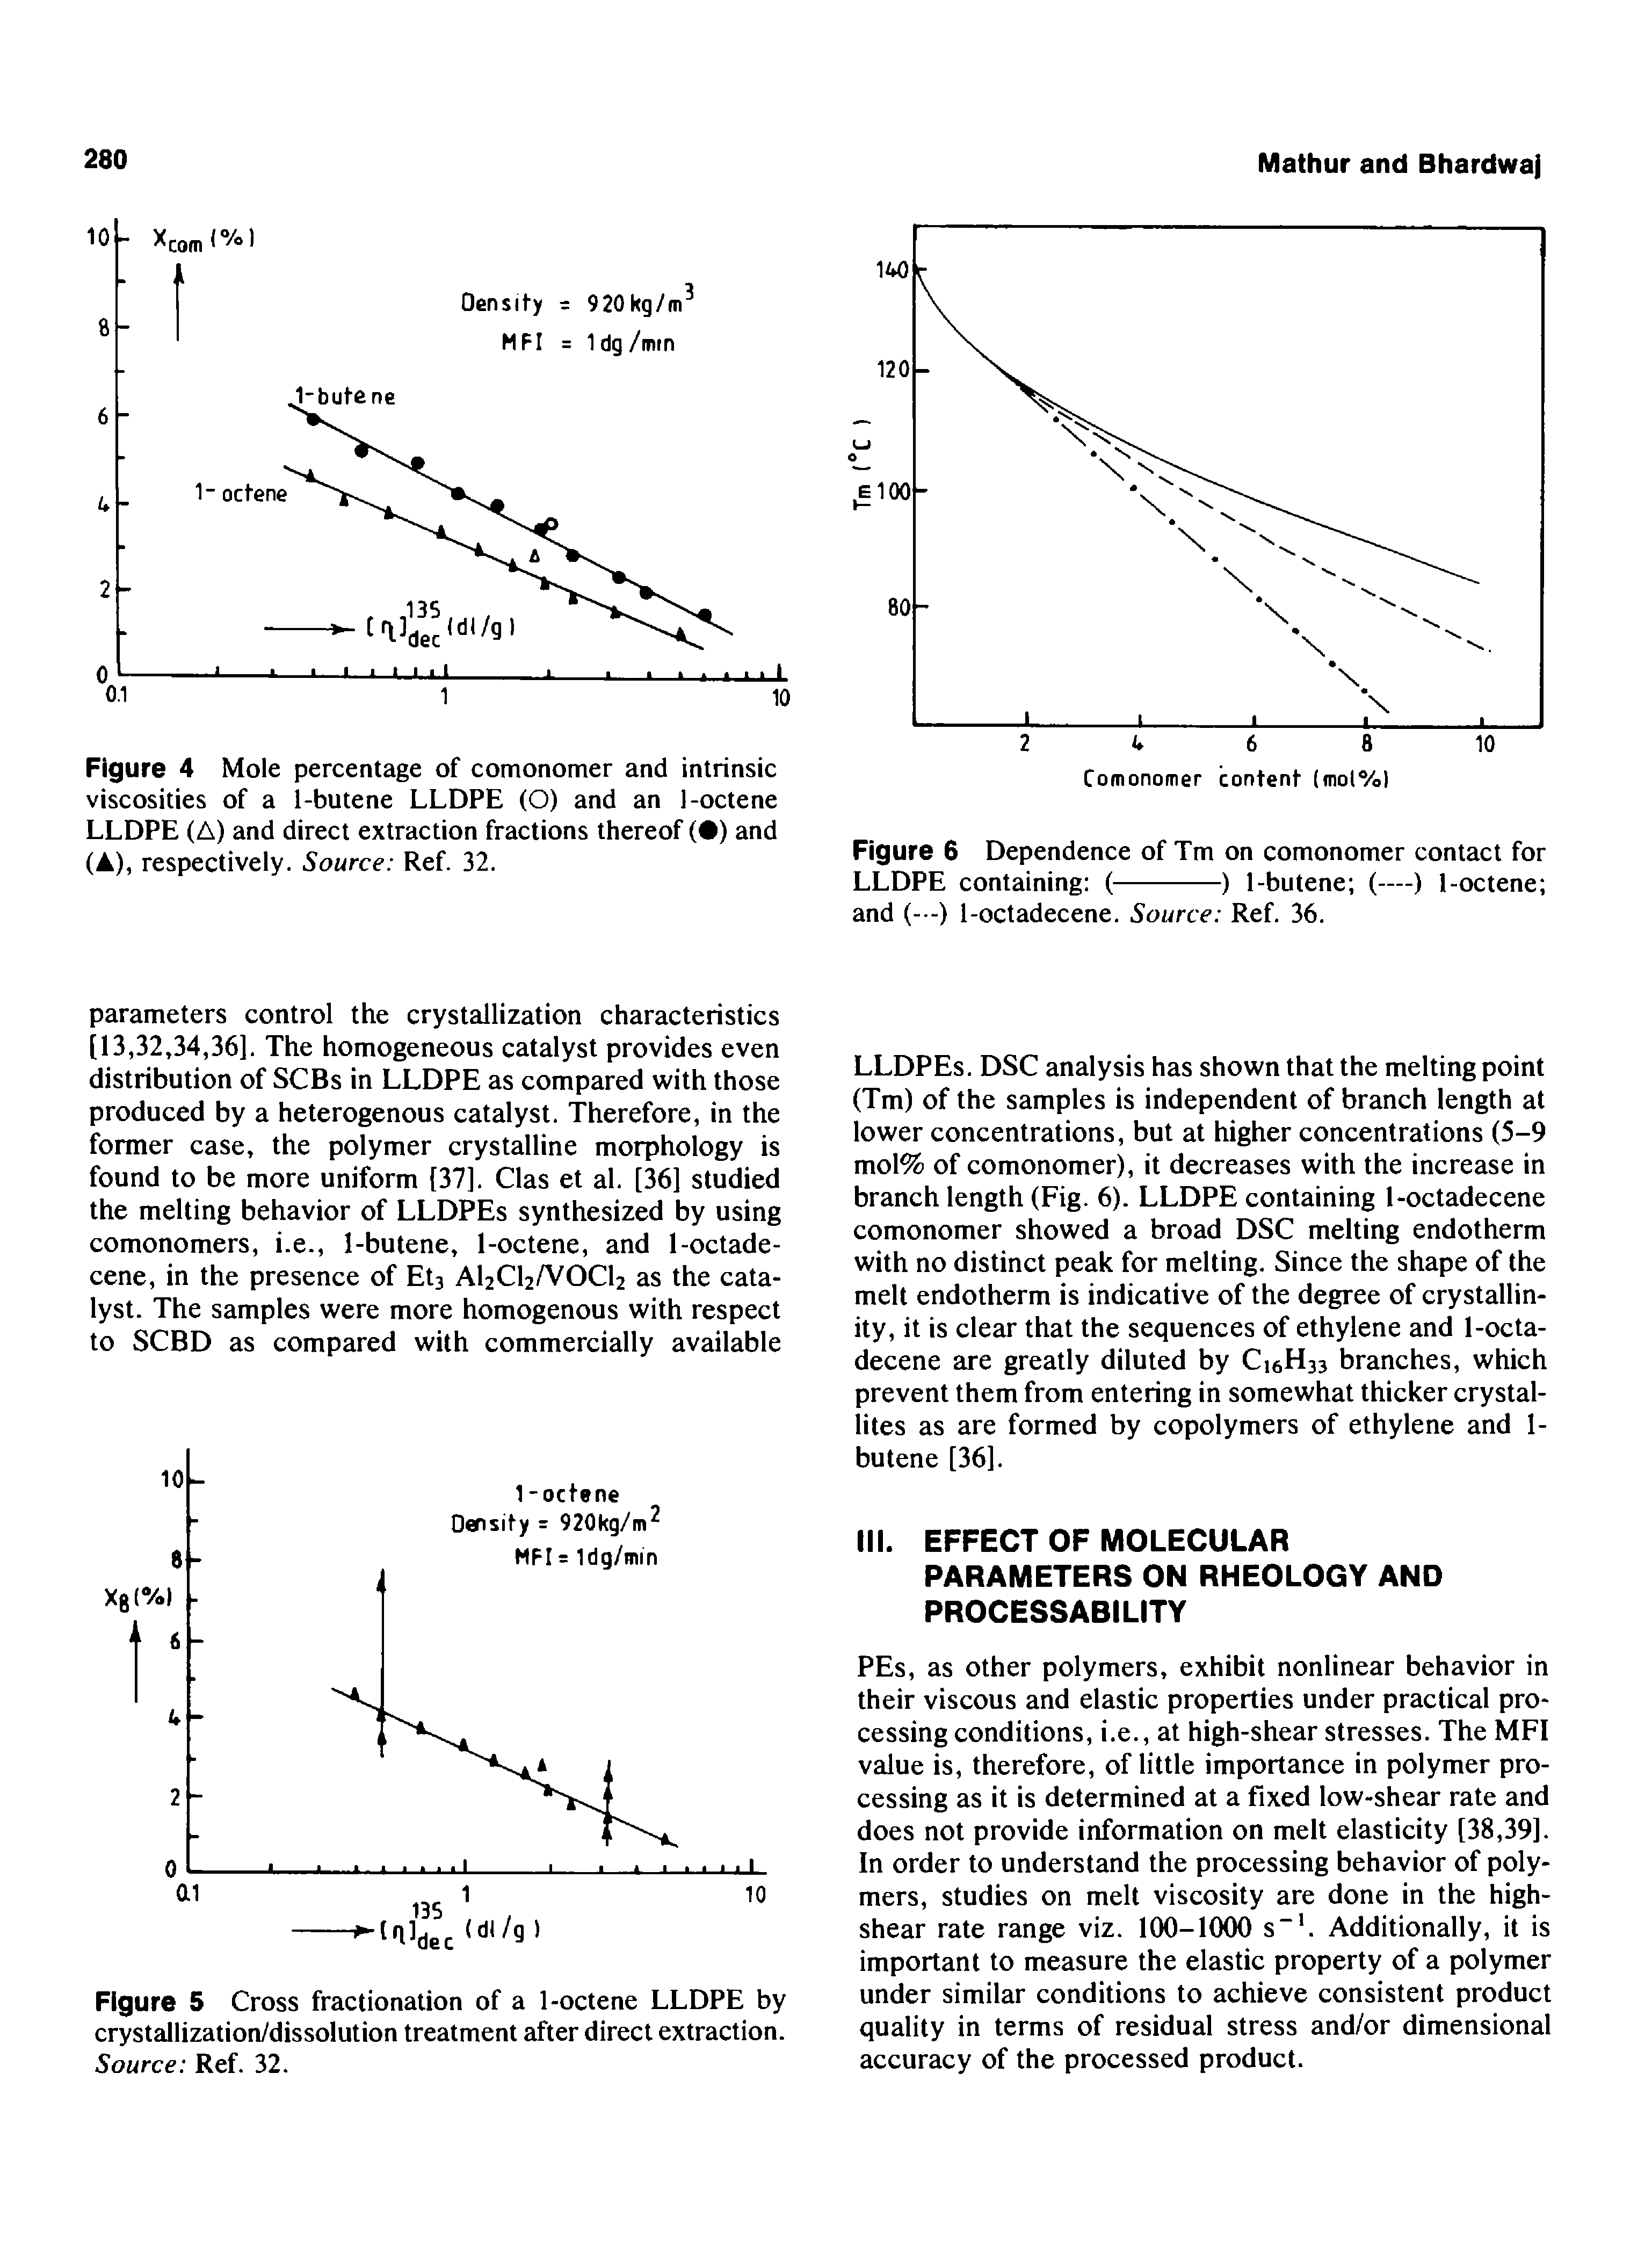 Figure 5 Cross fractionation of a 1-octene LLDPE by crystallization/dissolution treatment after direct extraction. Source Ref. 32.